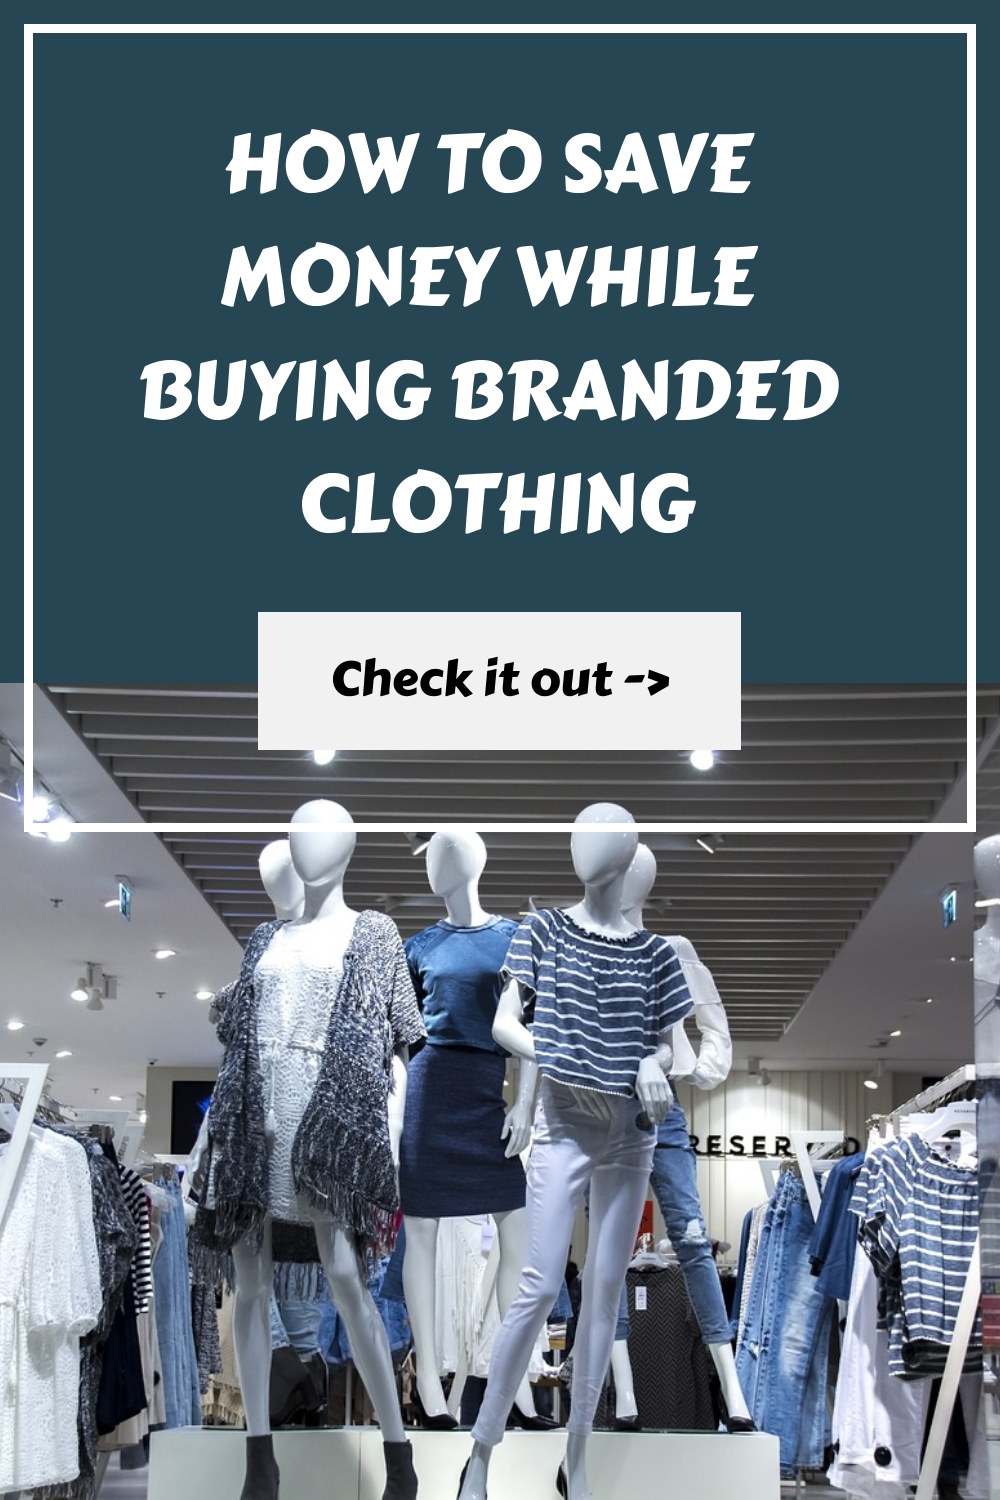 How to Save Money While Buying Branded Clothing